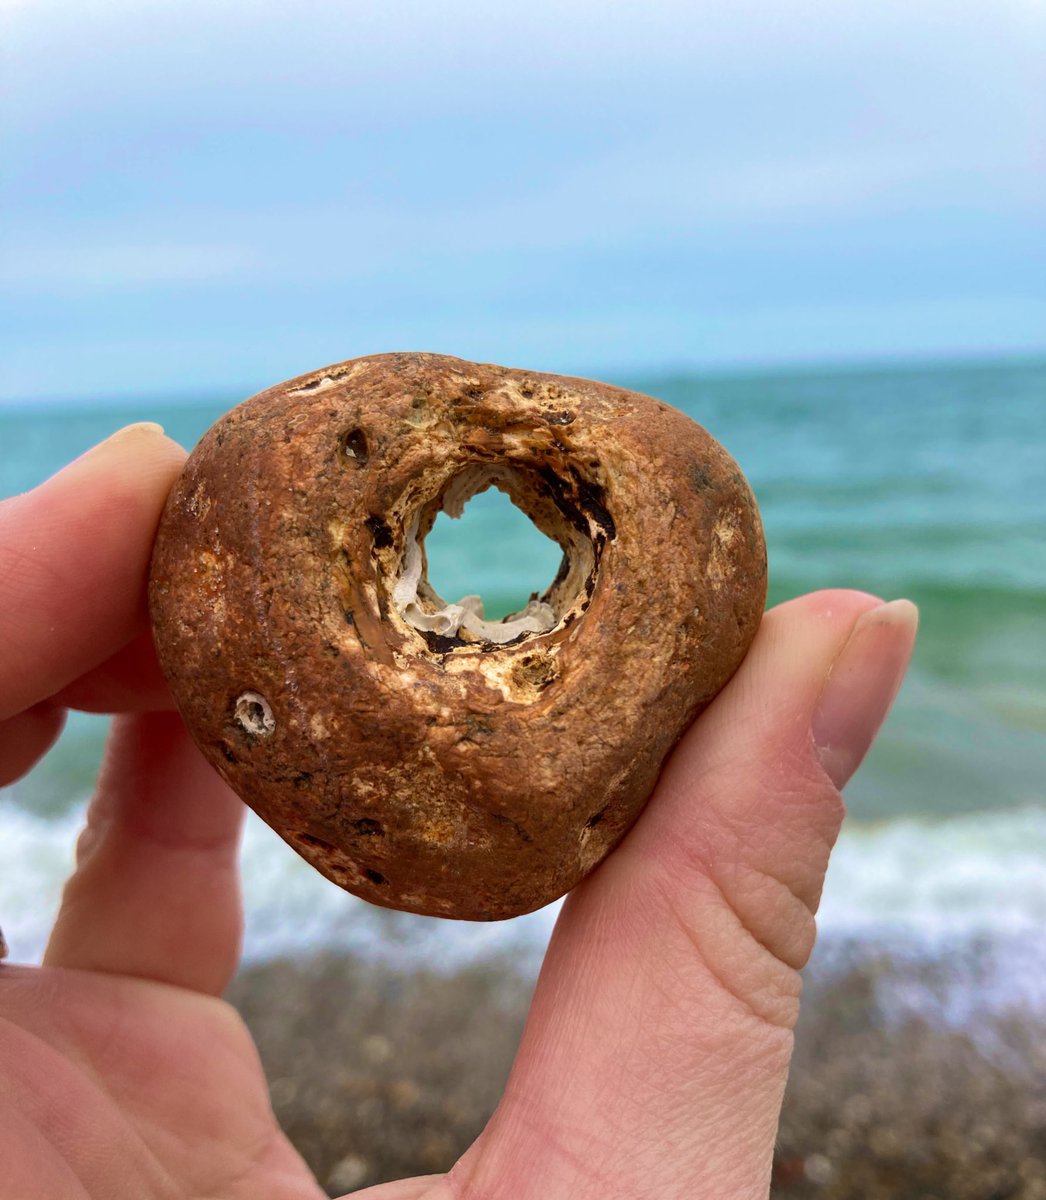 Hagstones are rocks found by the sea with naturally occurring holes in them. There are used to protect the bearer from evildoers or let the user see to other worlds. #FolkyFriday